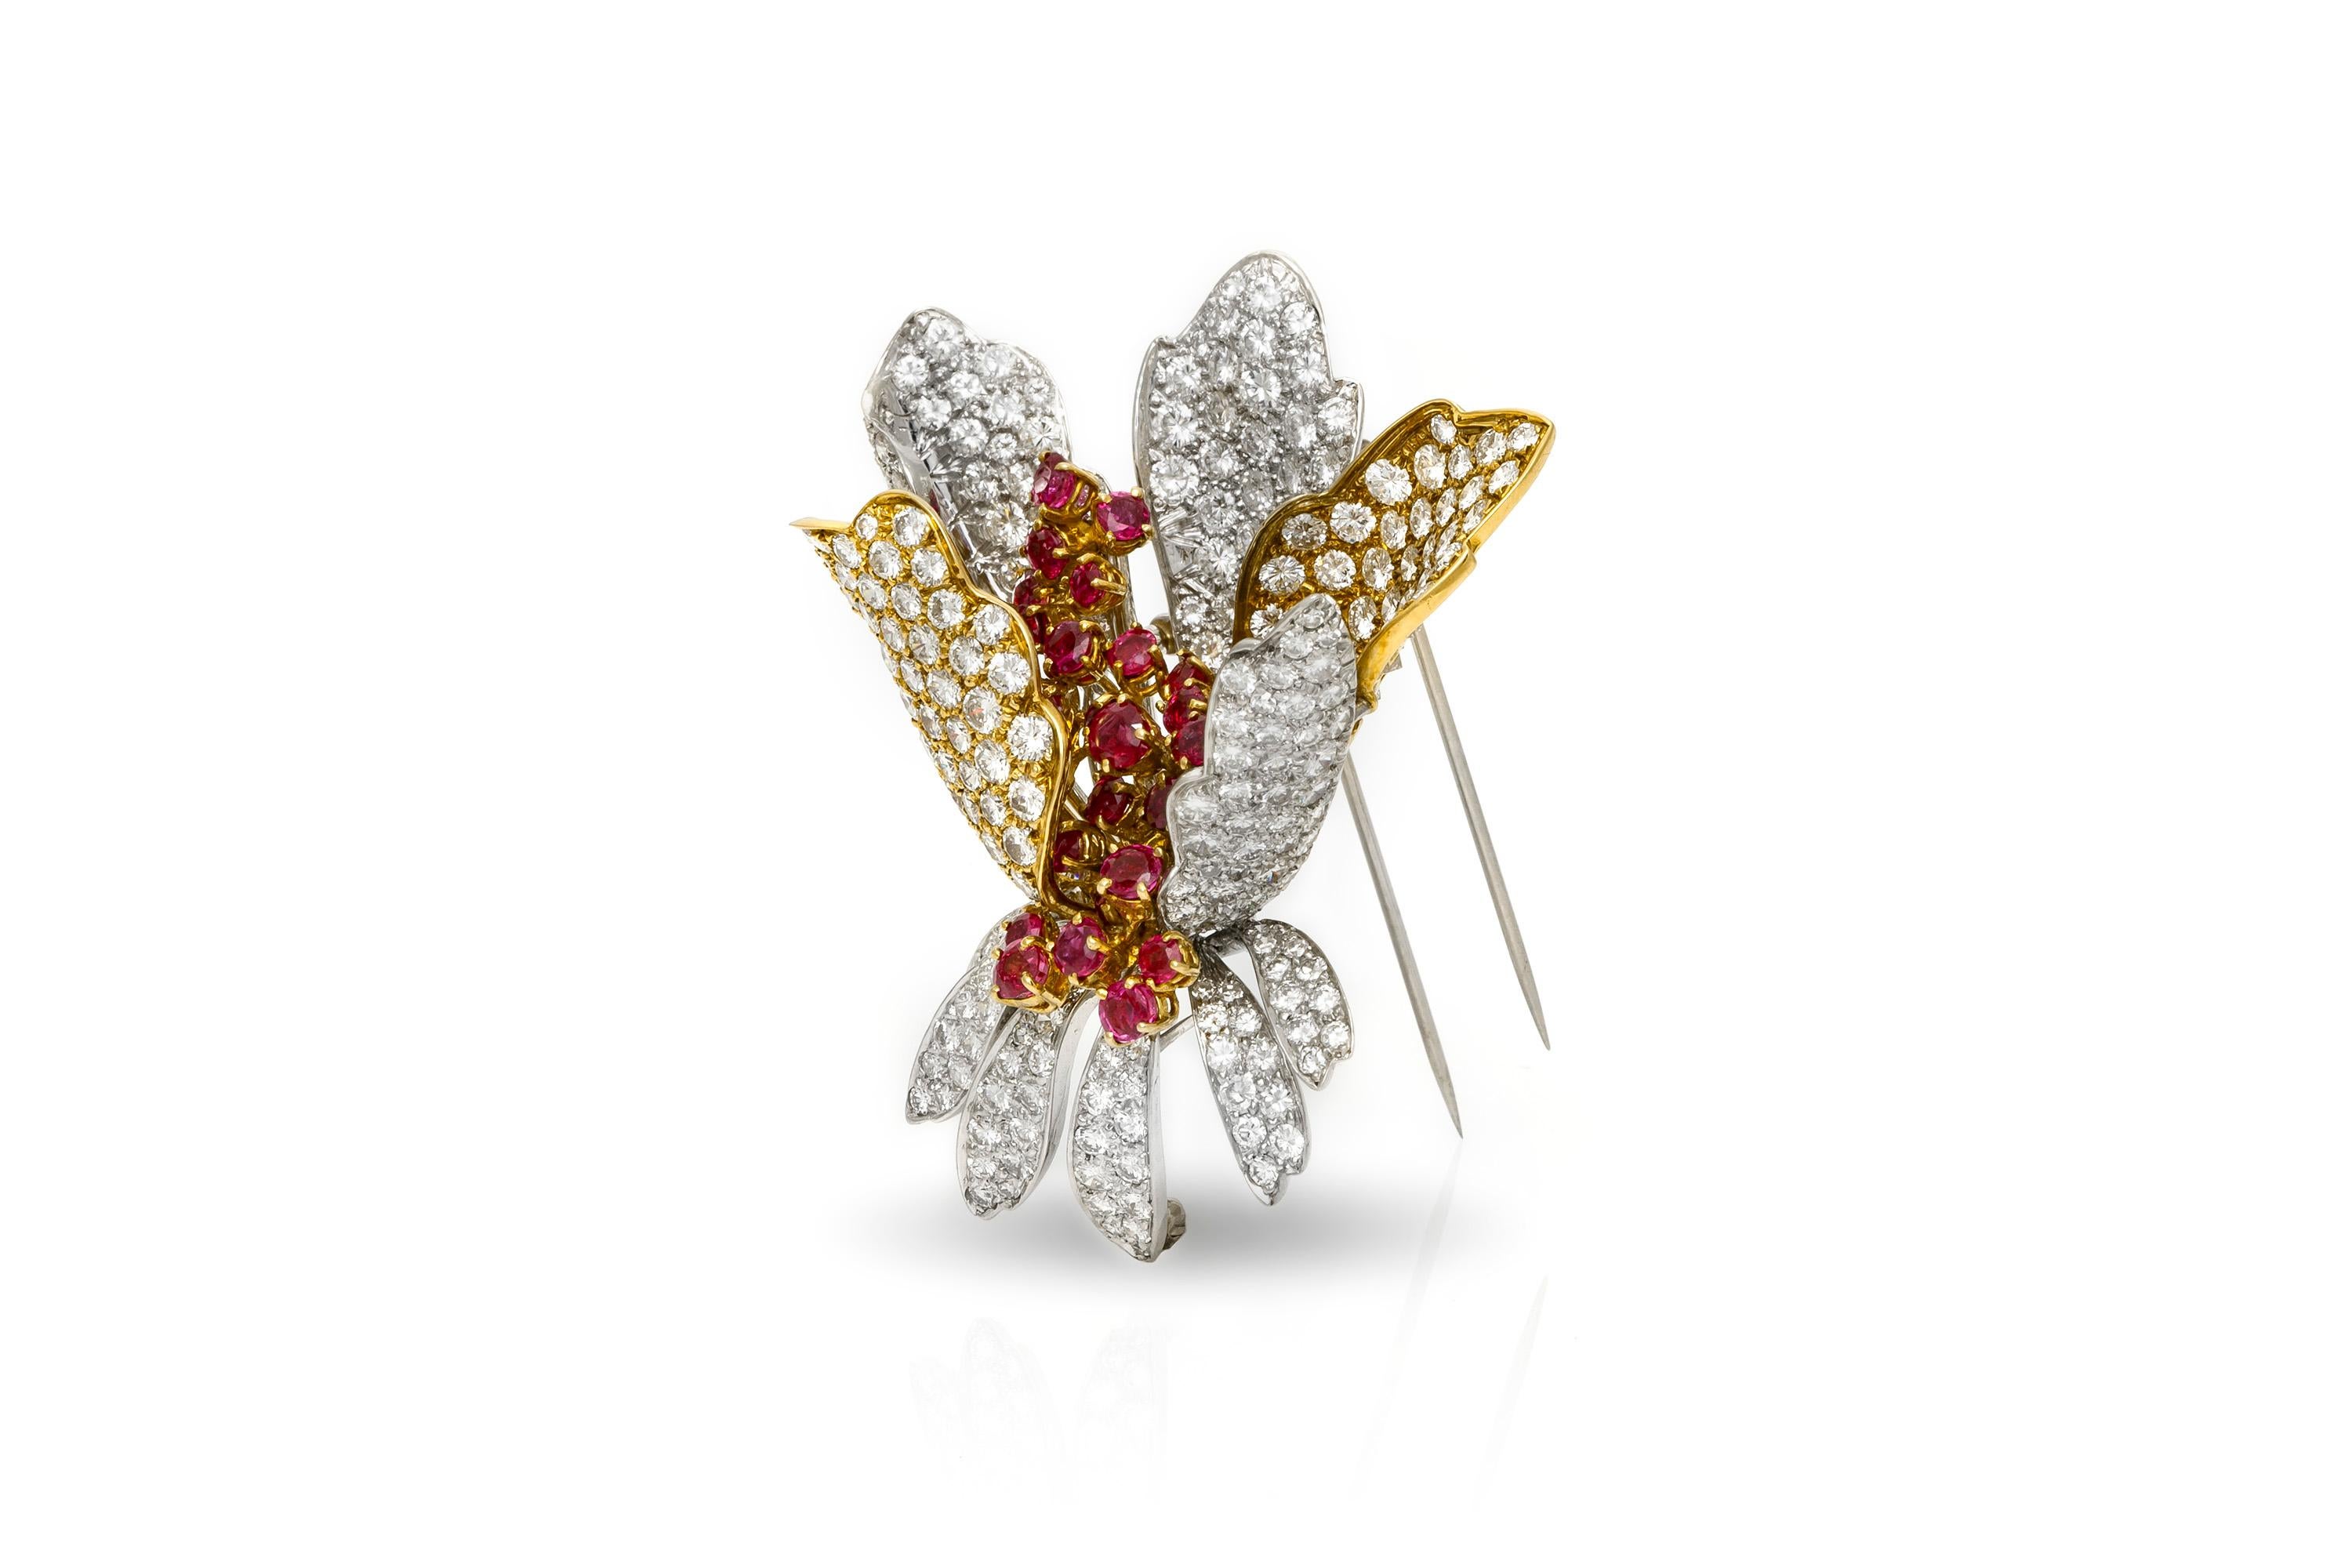 Flower brooch finely crafted in 18k and platinum ,weighing approximately 6.00 carat ruby and approximately 20.00 carat diamond. 
